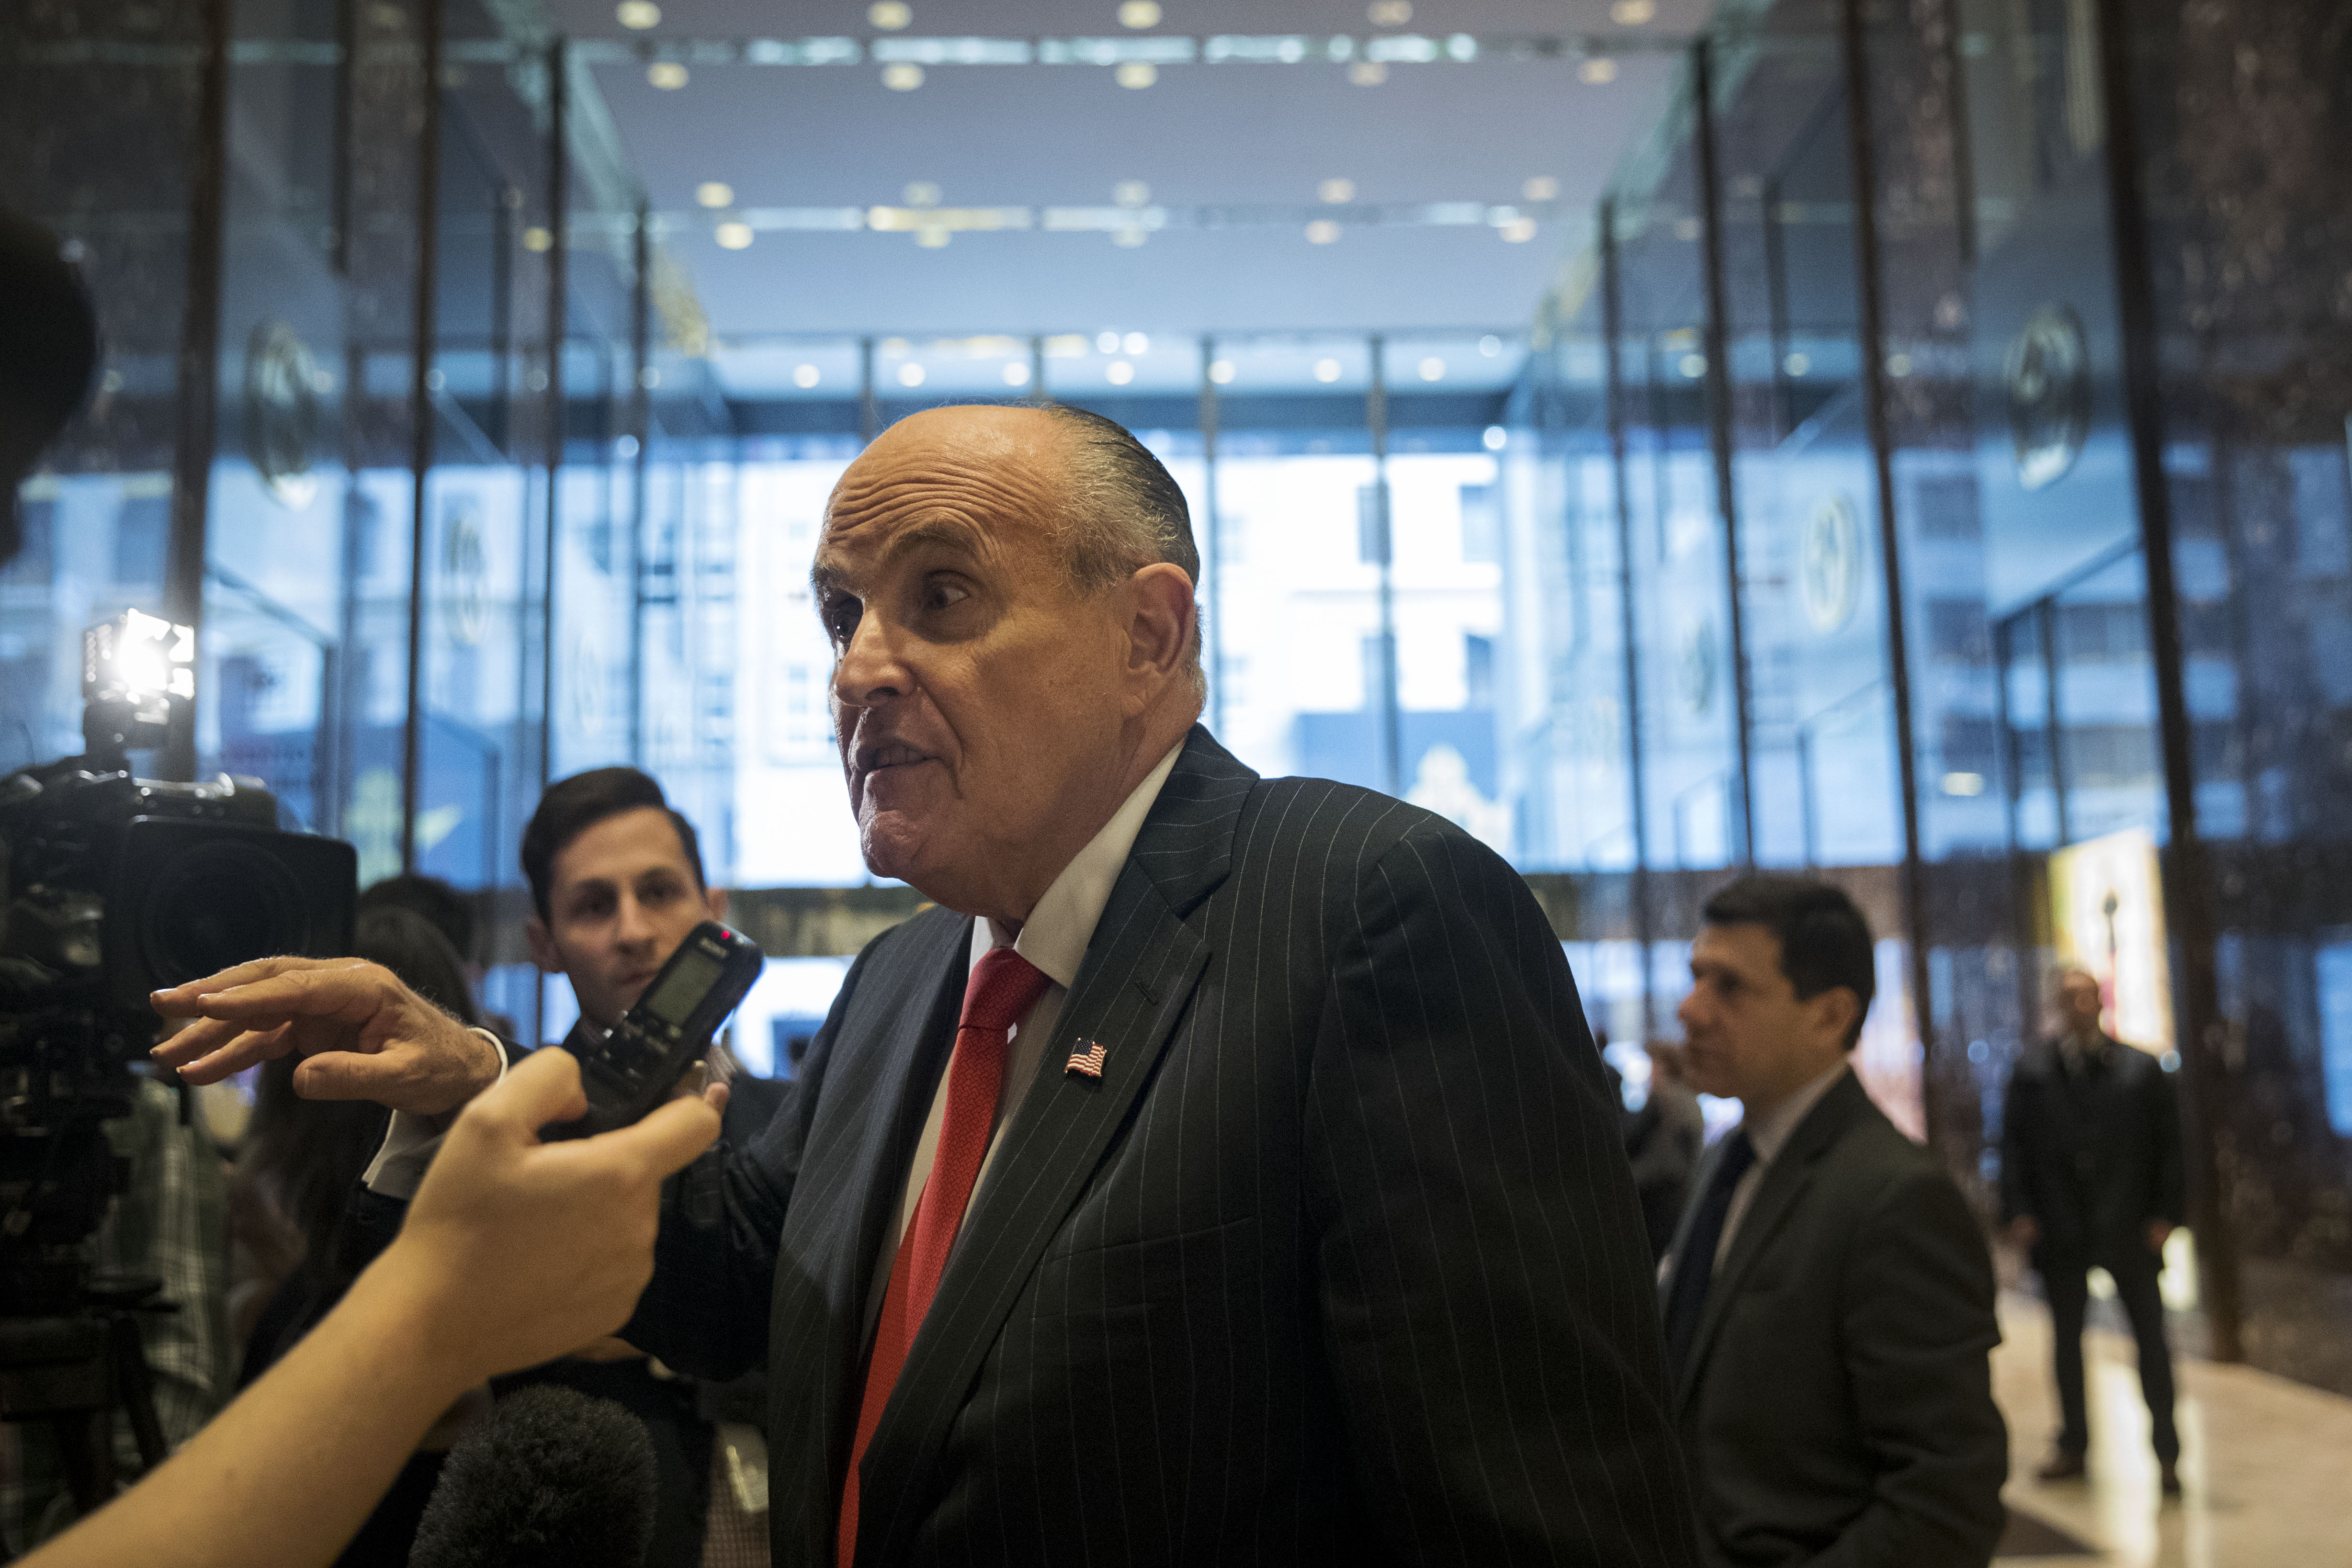 Former New York City Mayor Rudy Giuliani speaks to reporters at Trump Tower, January 12, 2017 in New York City. (Drew Angerer/Getty Images)